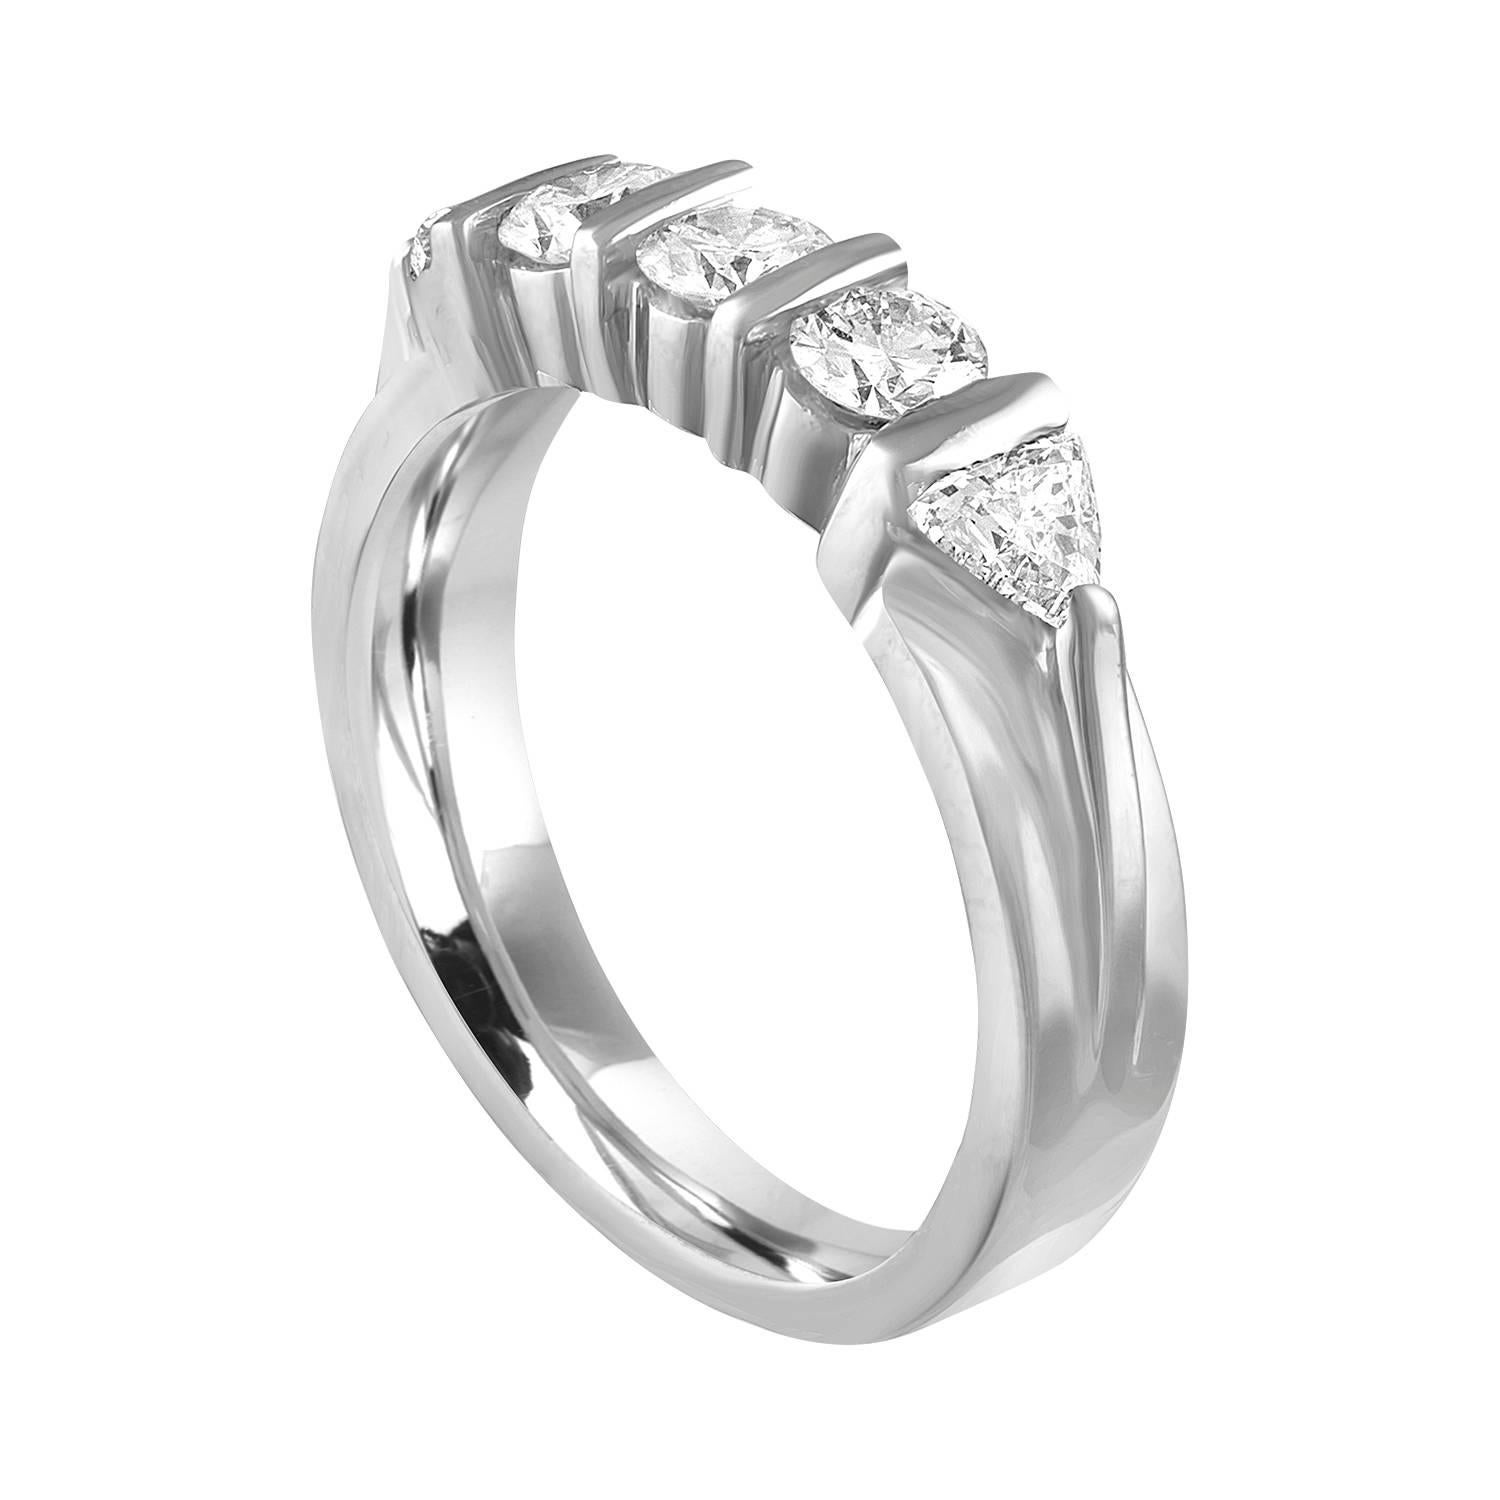 Very Beautiful Half Diamond Band Ring.
The ring is Platinum 950.
There are 3 Round Cut Diamonds.
There are 2 Trillion Cut Diamonds.
There are 0.80 Carats In Diamonds G/H VS.
The ring is a size 6.00, sizable.
The band is 4.47 mm wide and tapers down